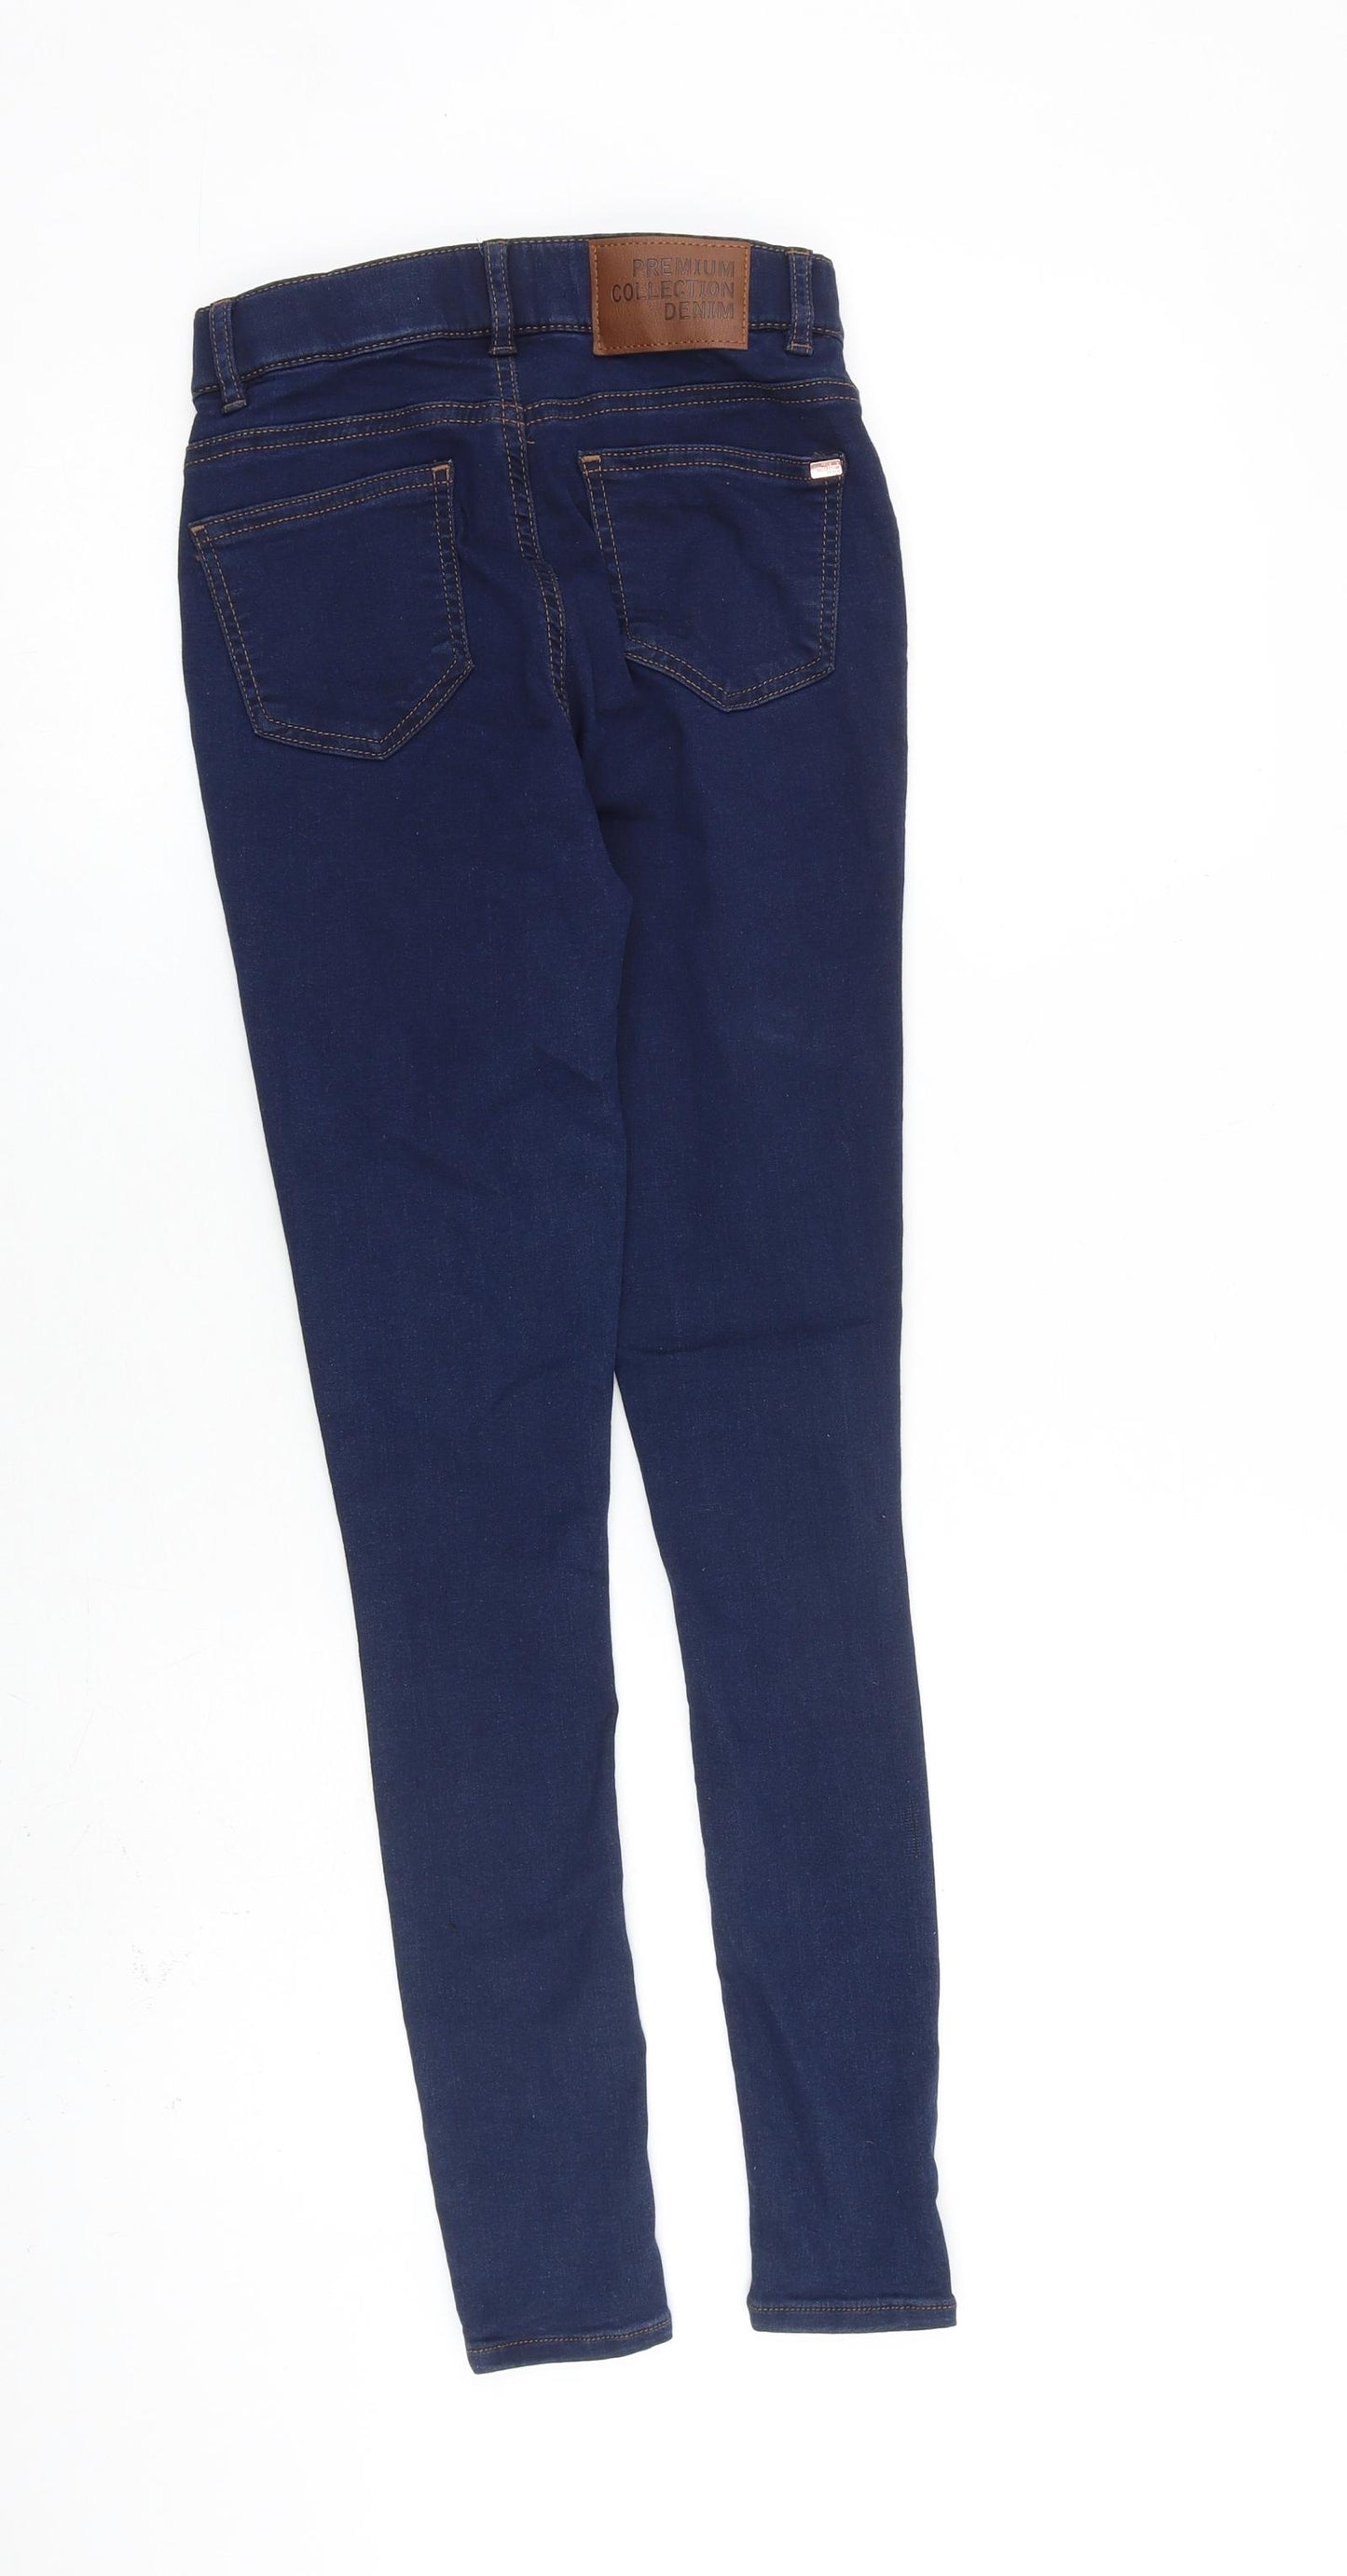 George Womens Blue Cotton Skinny Jeans Size 6 L28 in Slim Zip